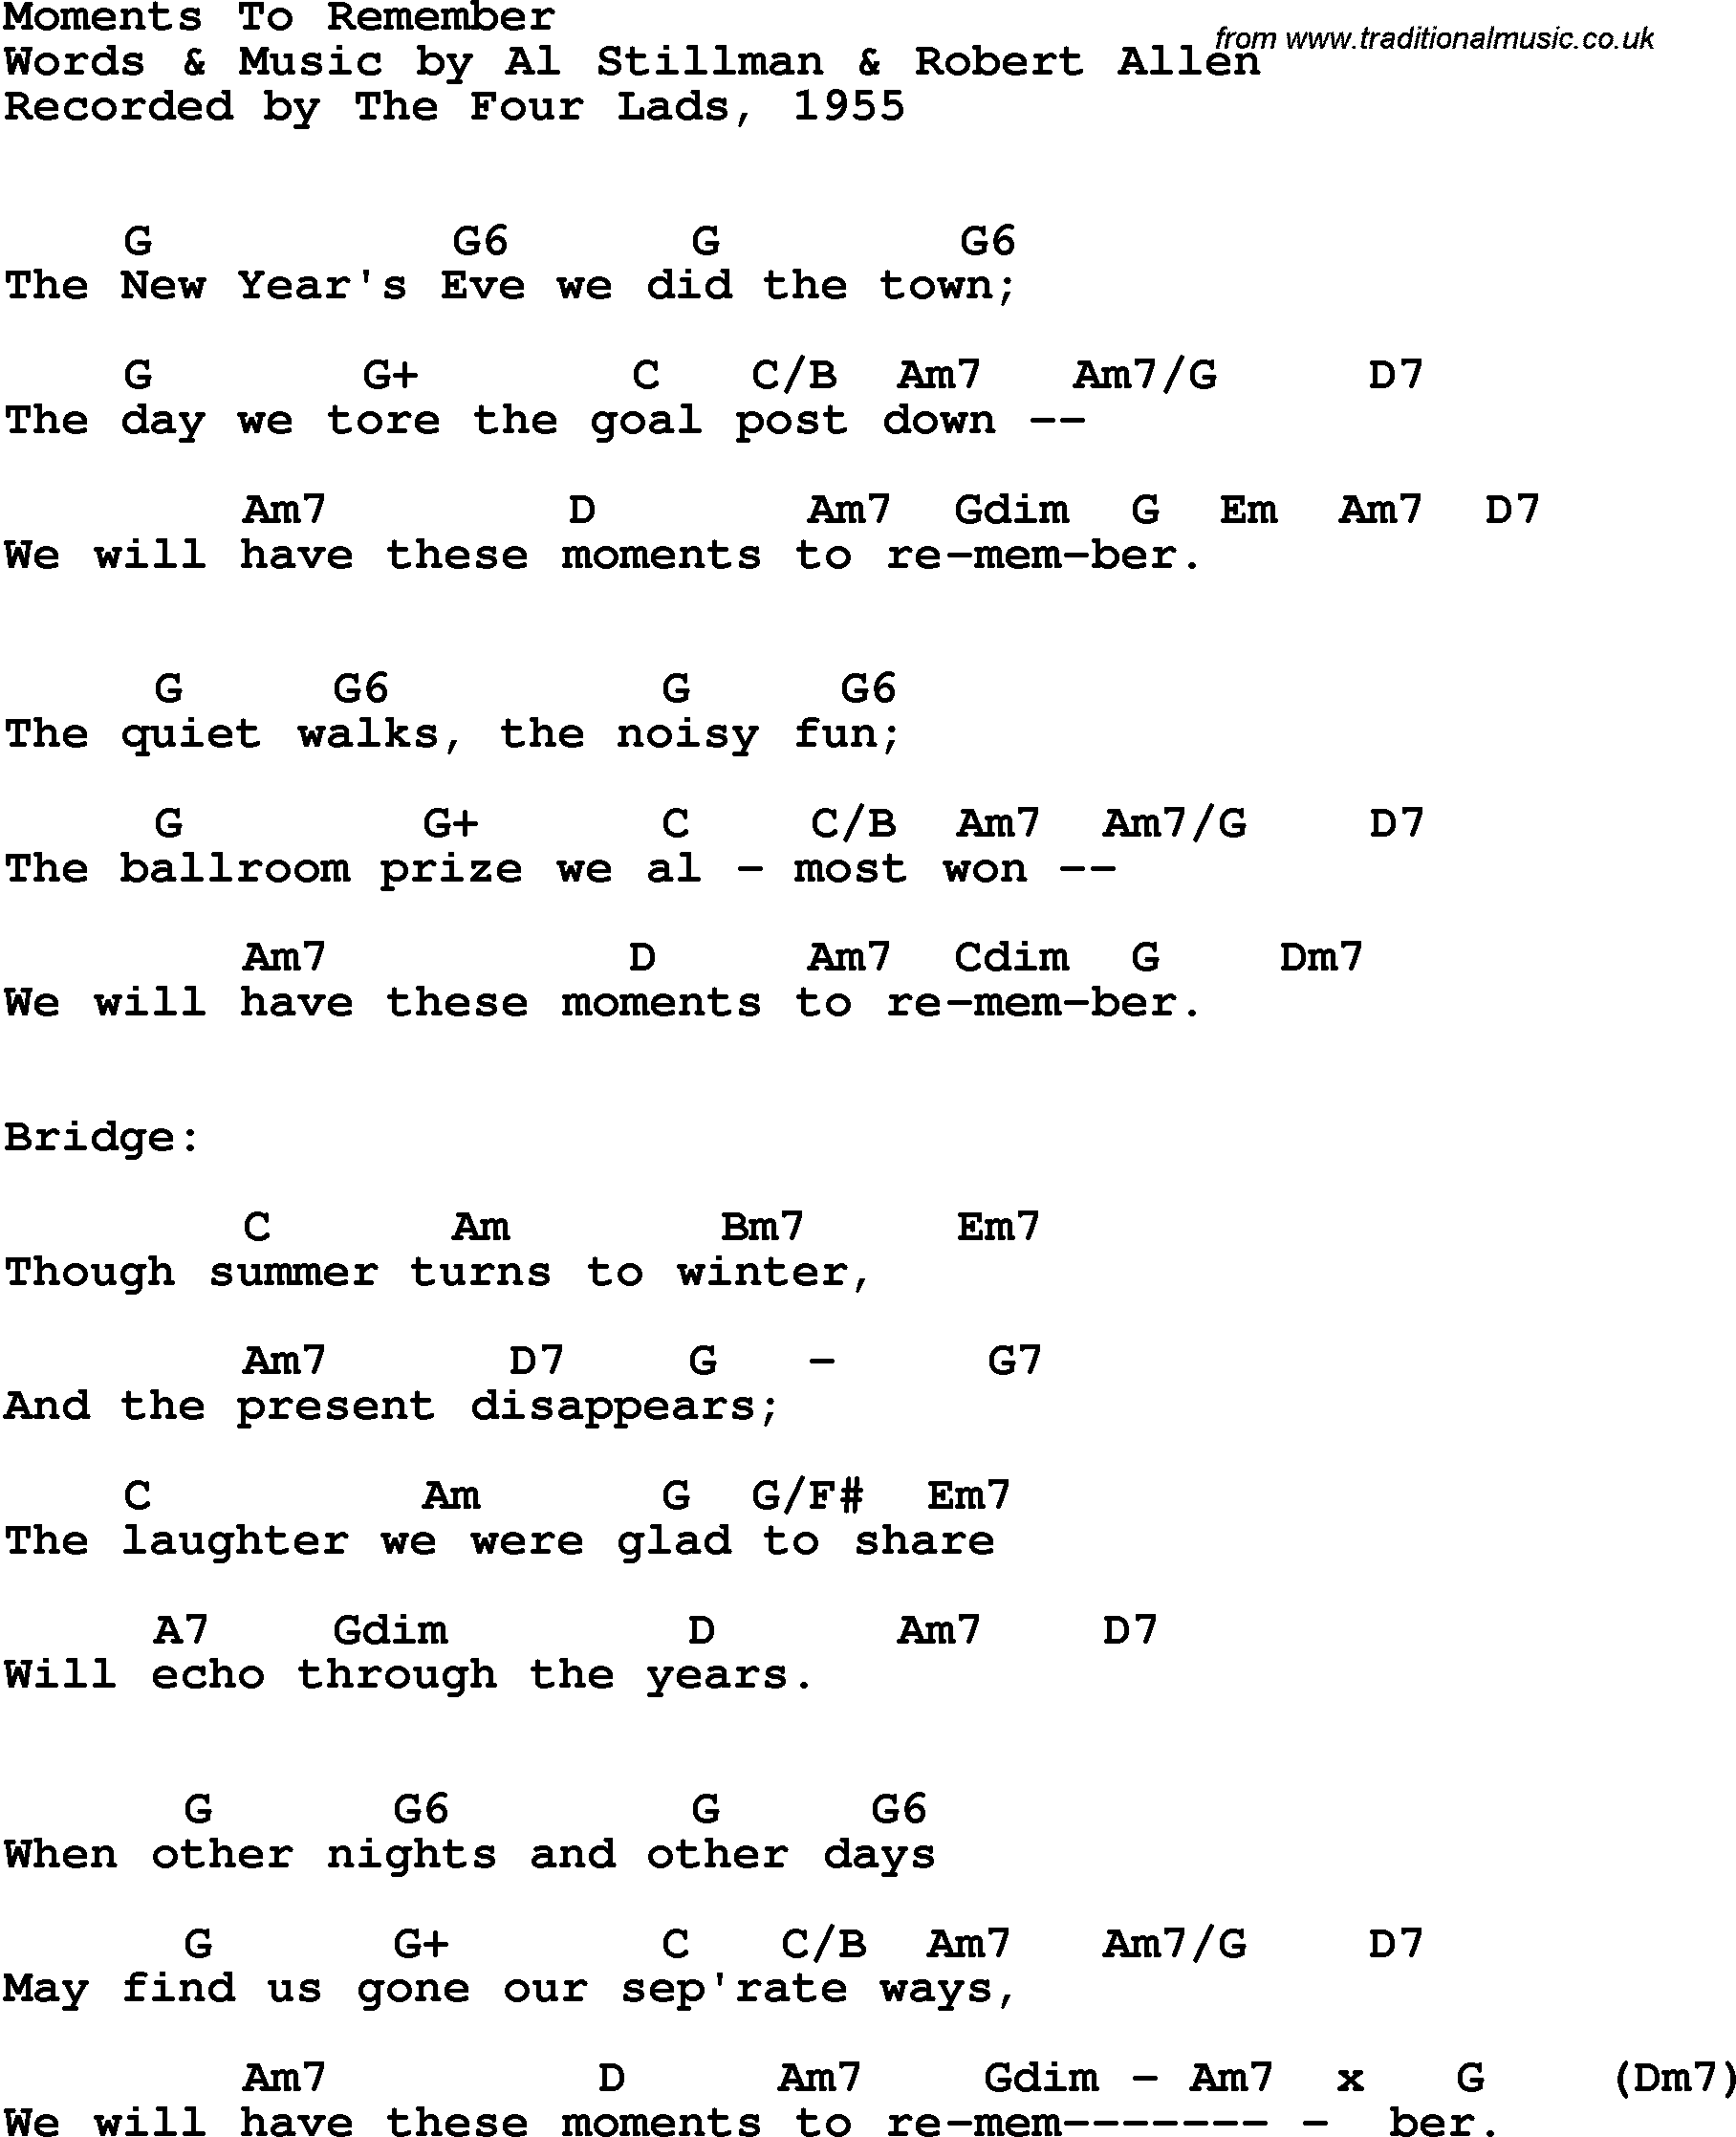 Song Lyrics with guitar chords for Moments To Remember - The Four Lads, 1955